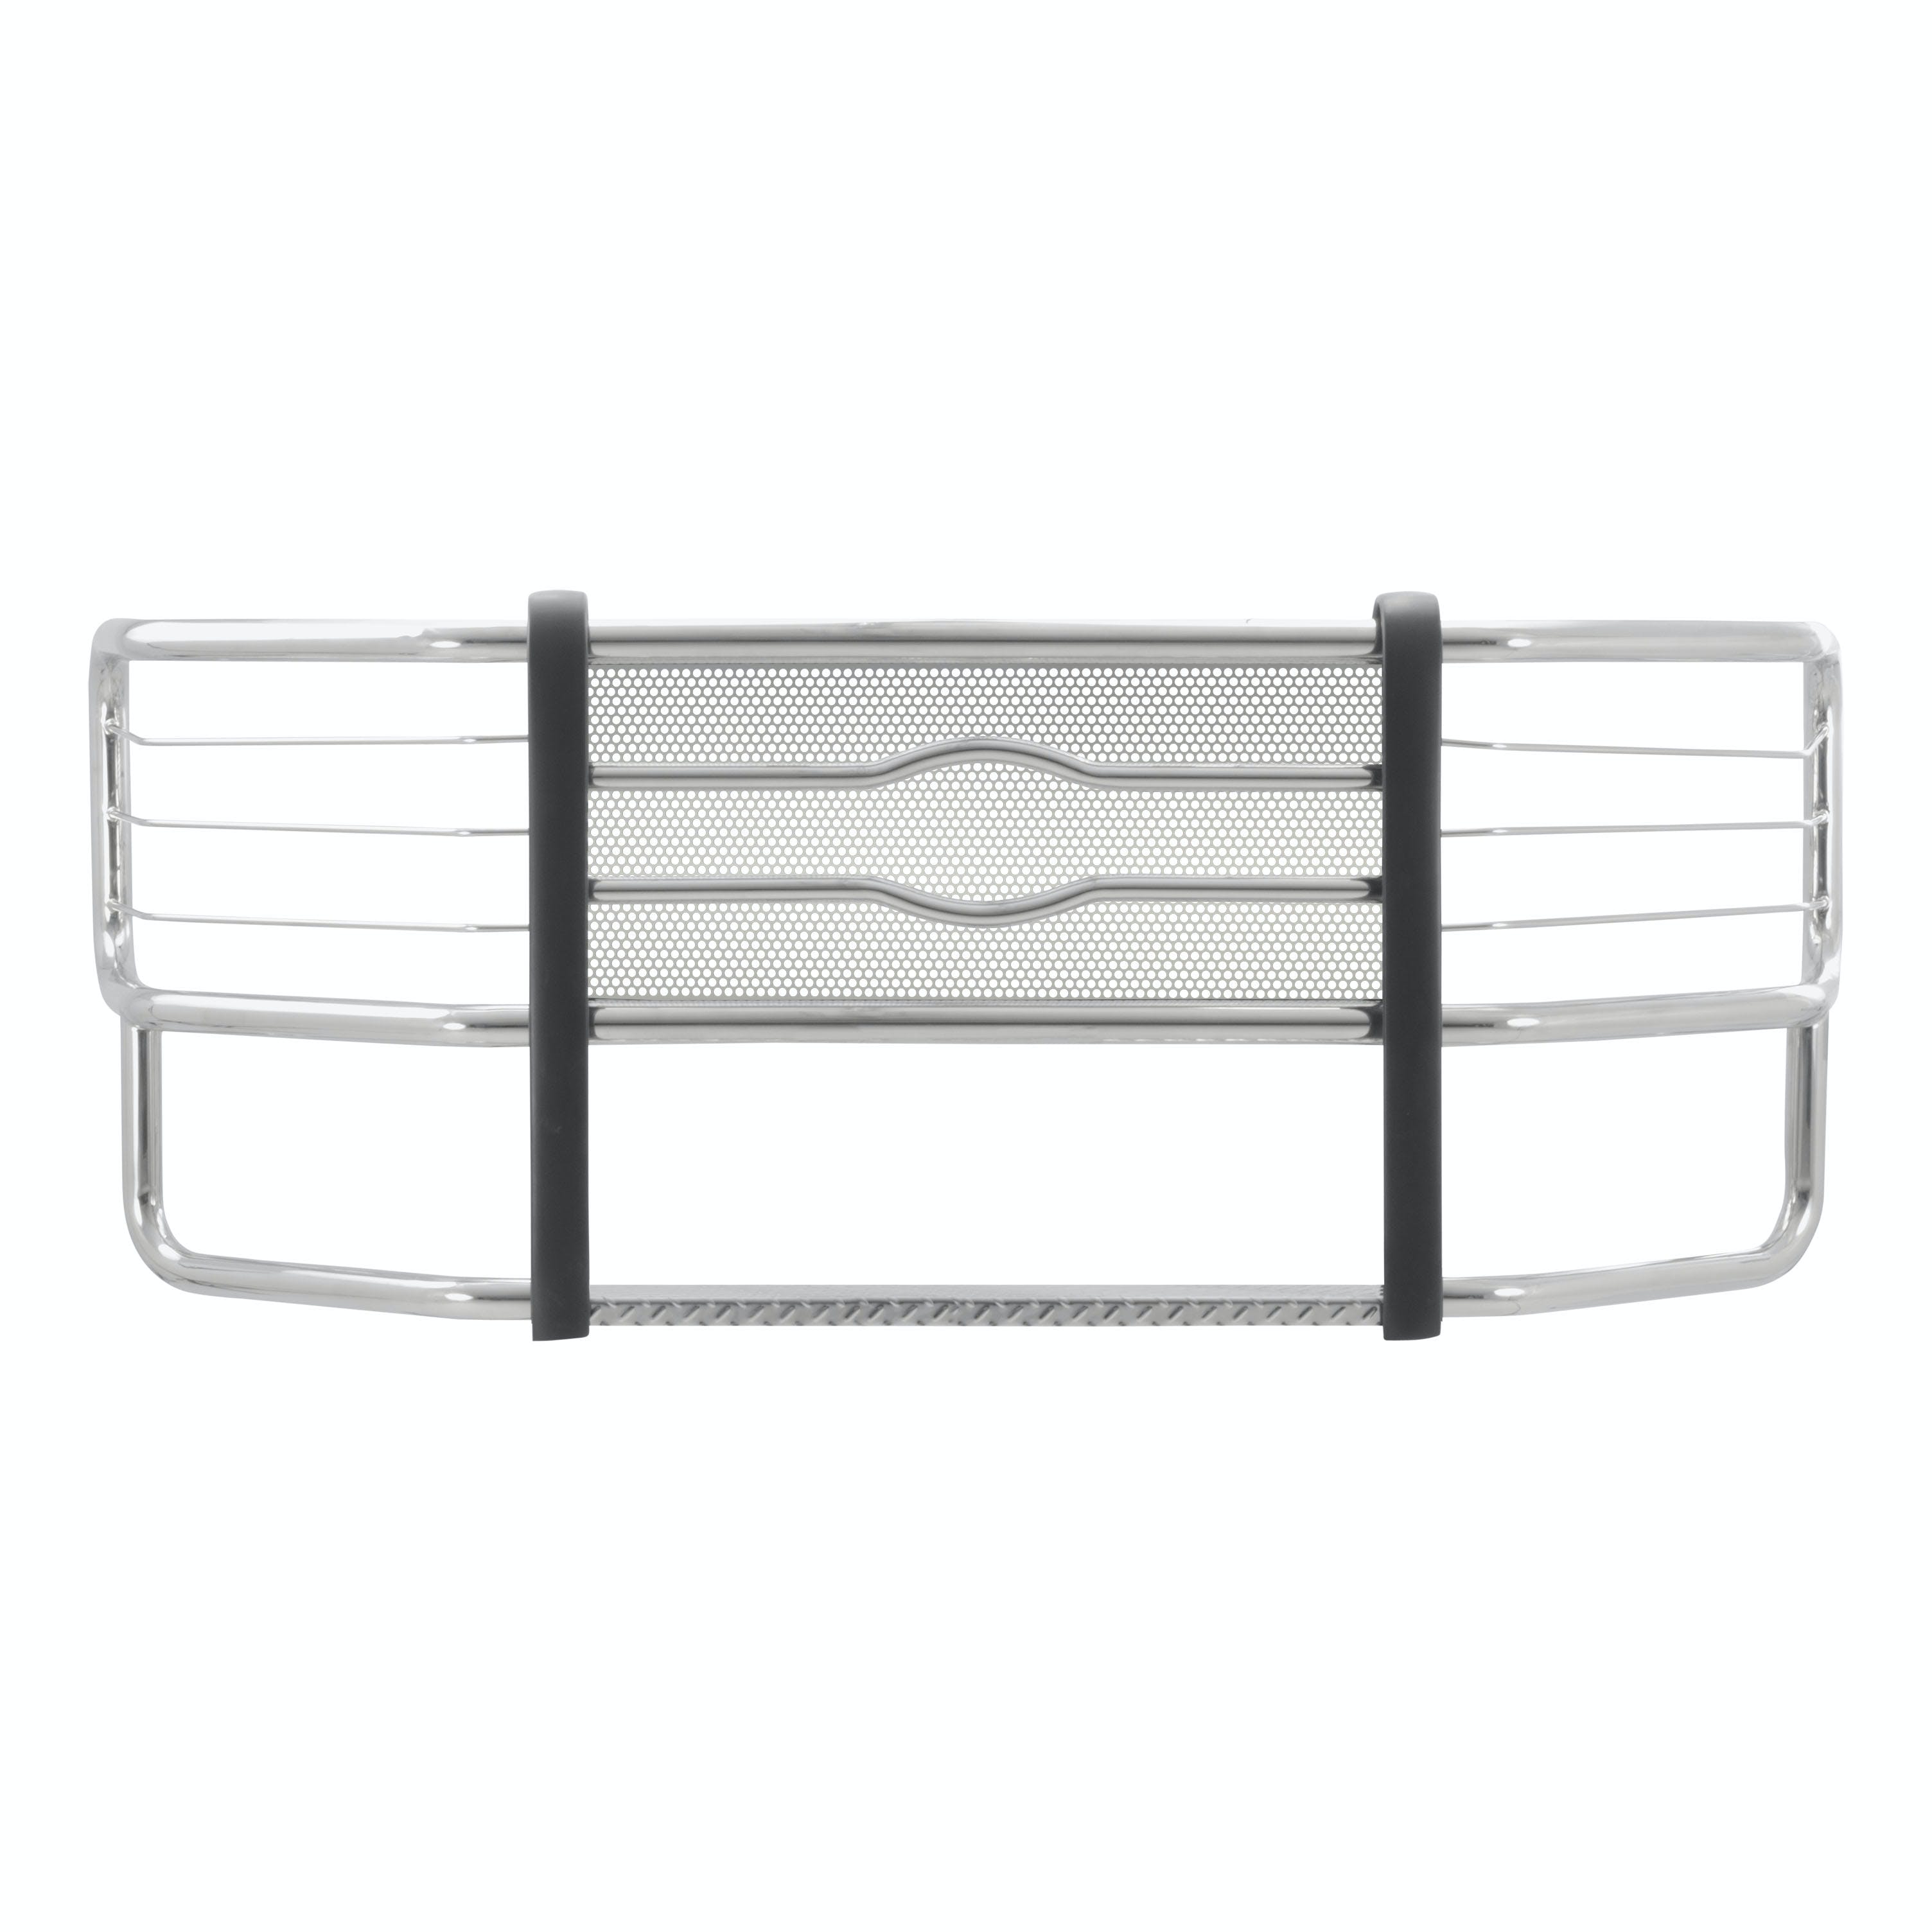 LUVERNE 311123-321122 Prowler Max Grille Guard